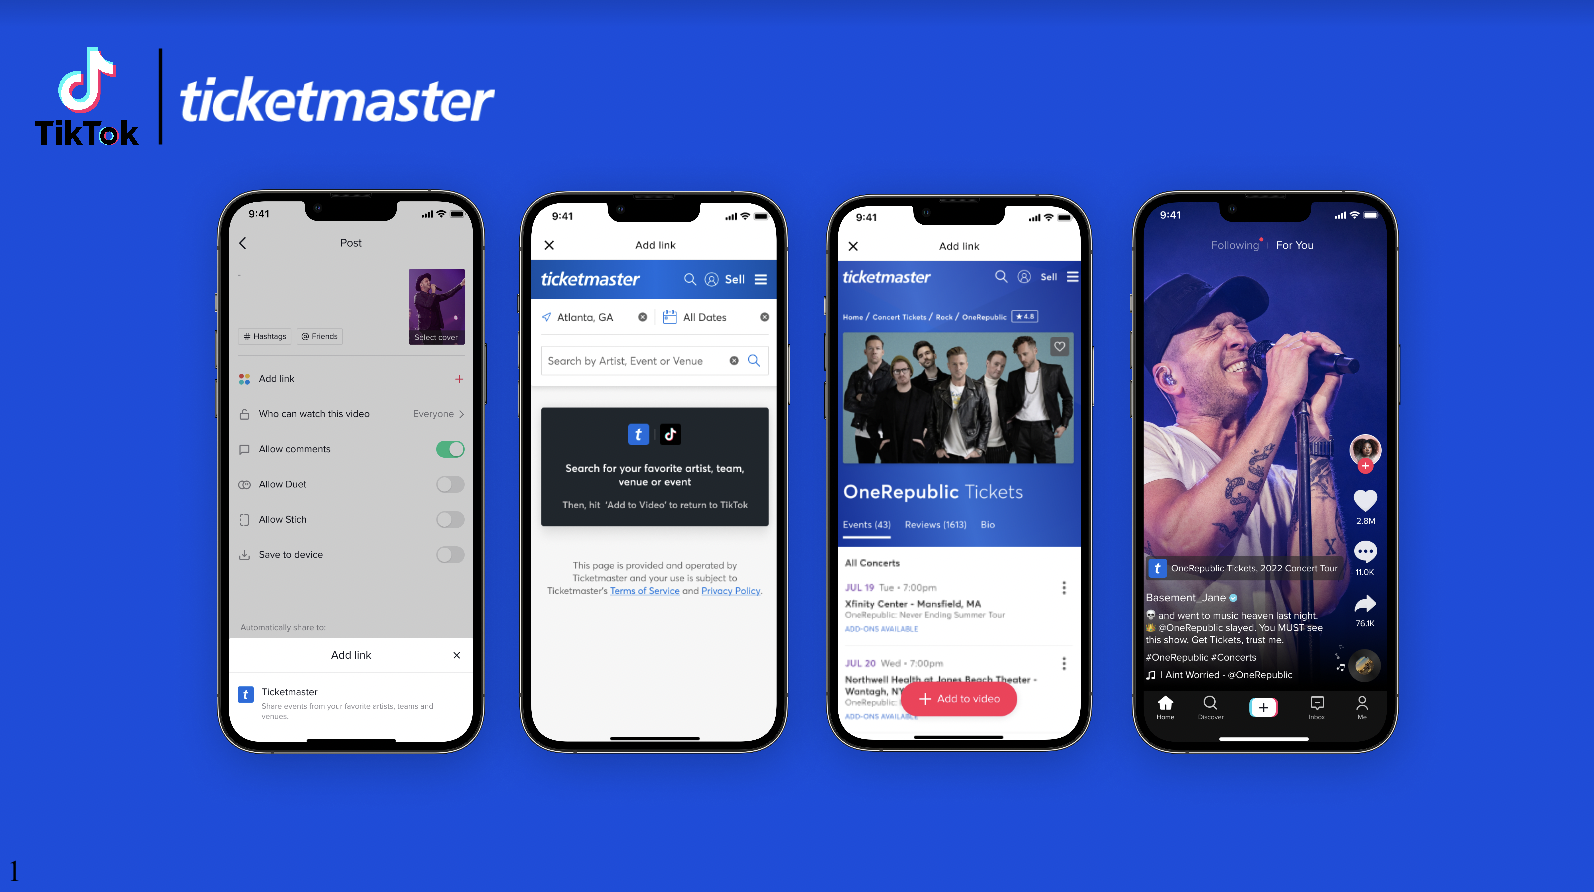 Ticketmaster, TikTok partner to give users a new way to discover and purchase event tickets